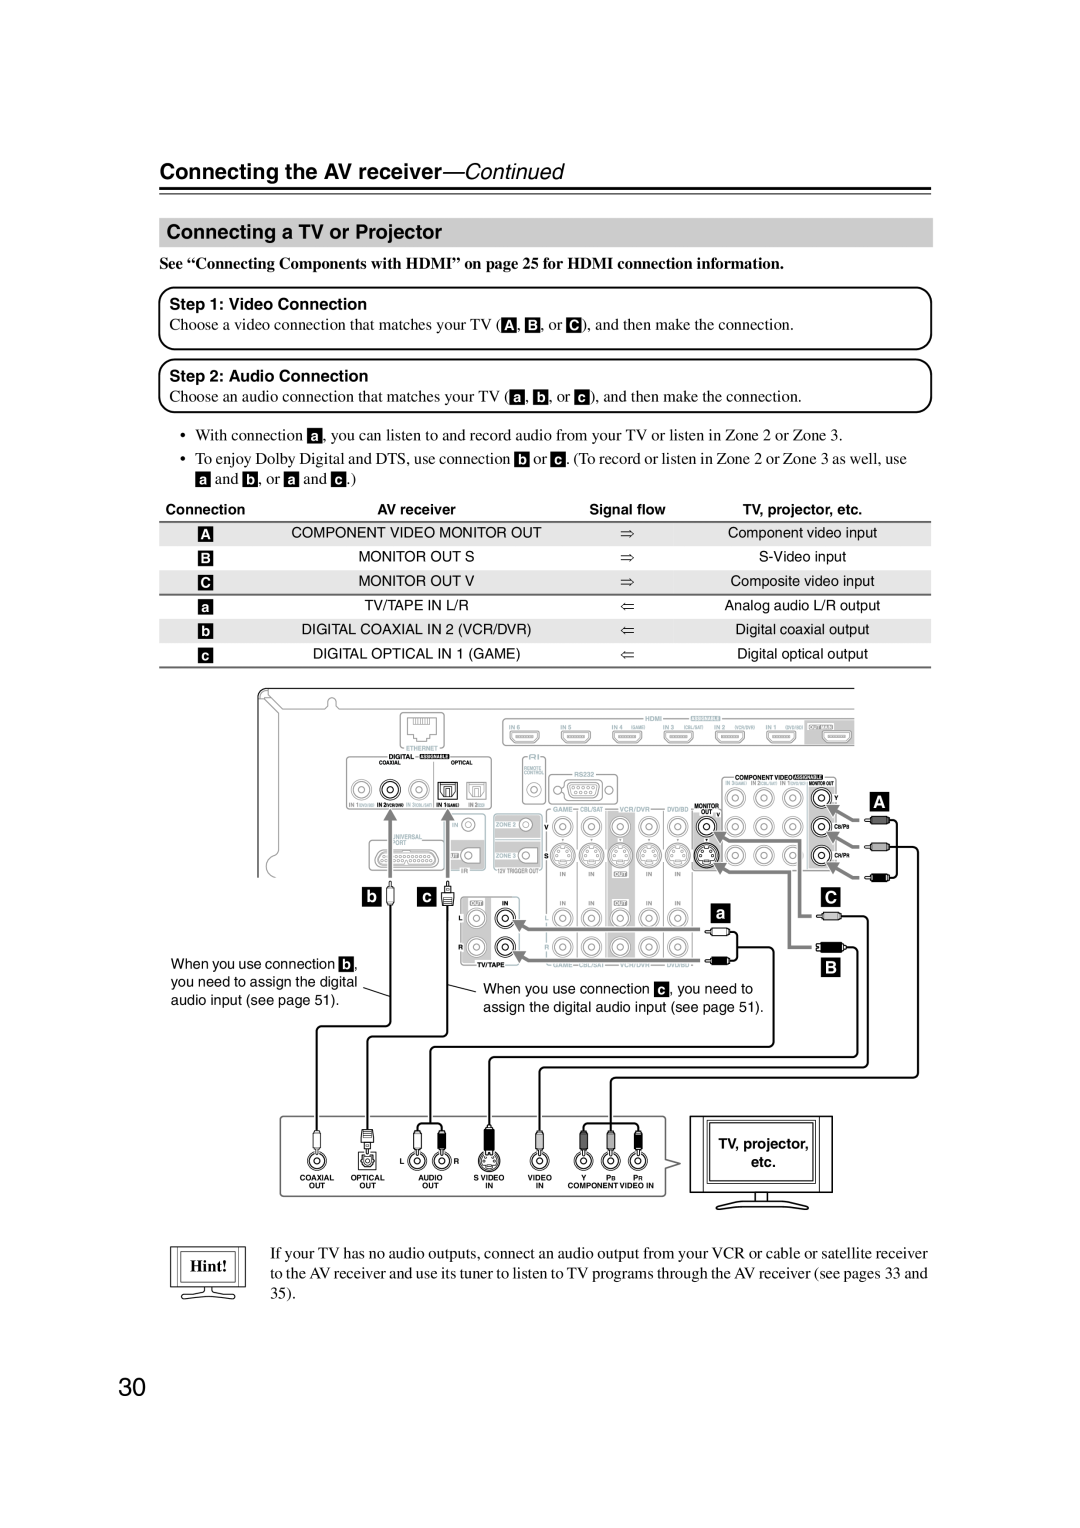 Onkyo TX-NR1007 instruction manual Connecting a TV or Projector, Connecting the AV receiver—Continued, Hint 